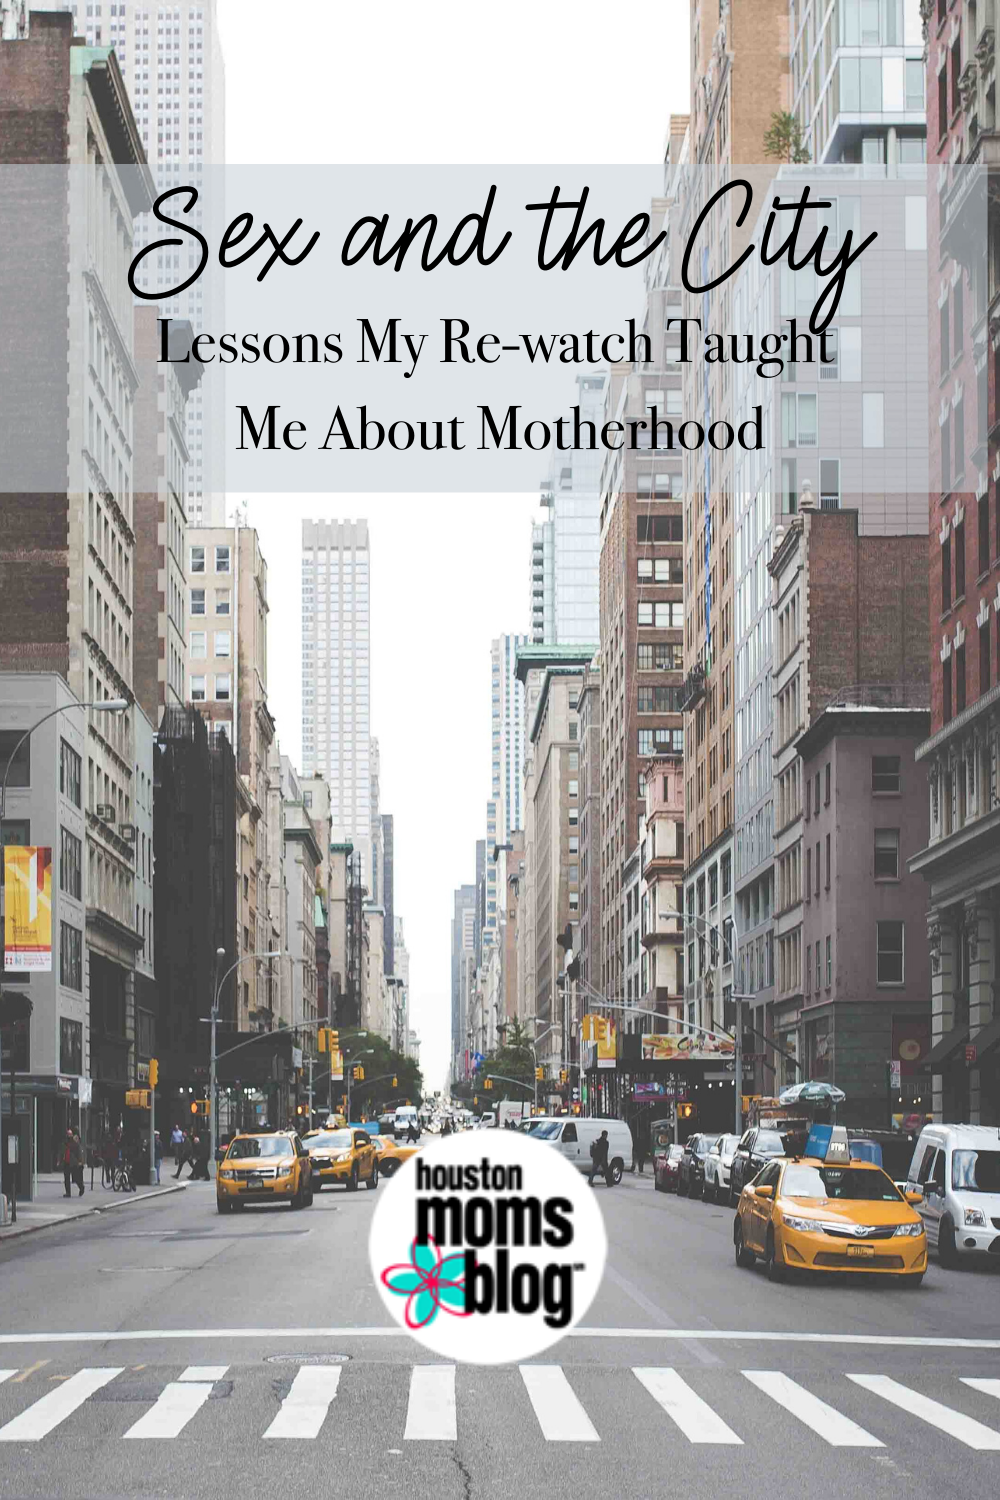 Houston Moms Blog "Sex and the City:: Lessons My Re-watch Taught My About Motherhood" #houstonmomsblog #momsaroundhouston